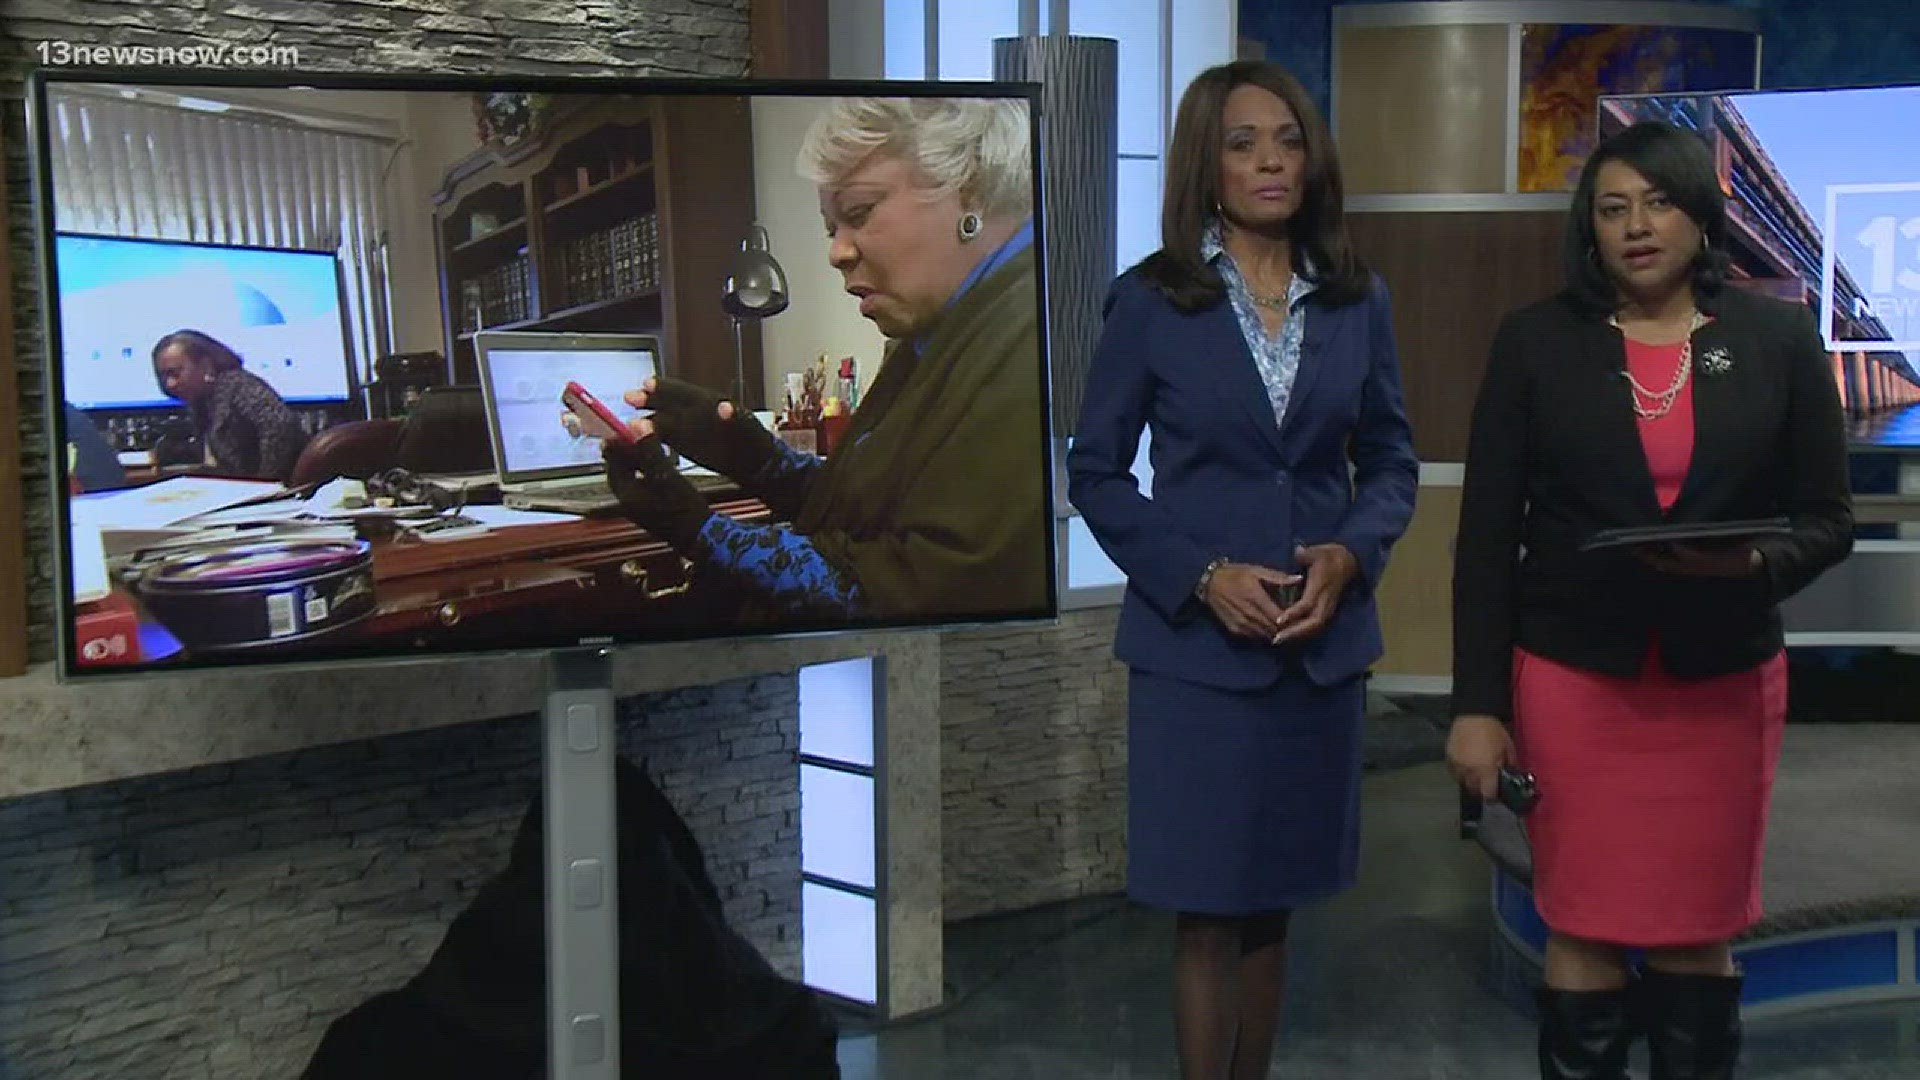 Top Stories from 13News Now on March 15 with Regina Mobley and Janet Roach